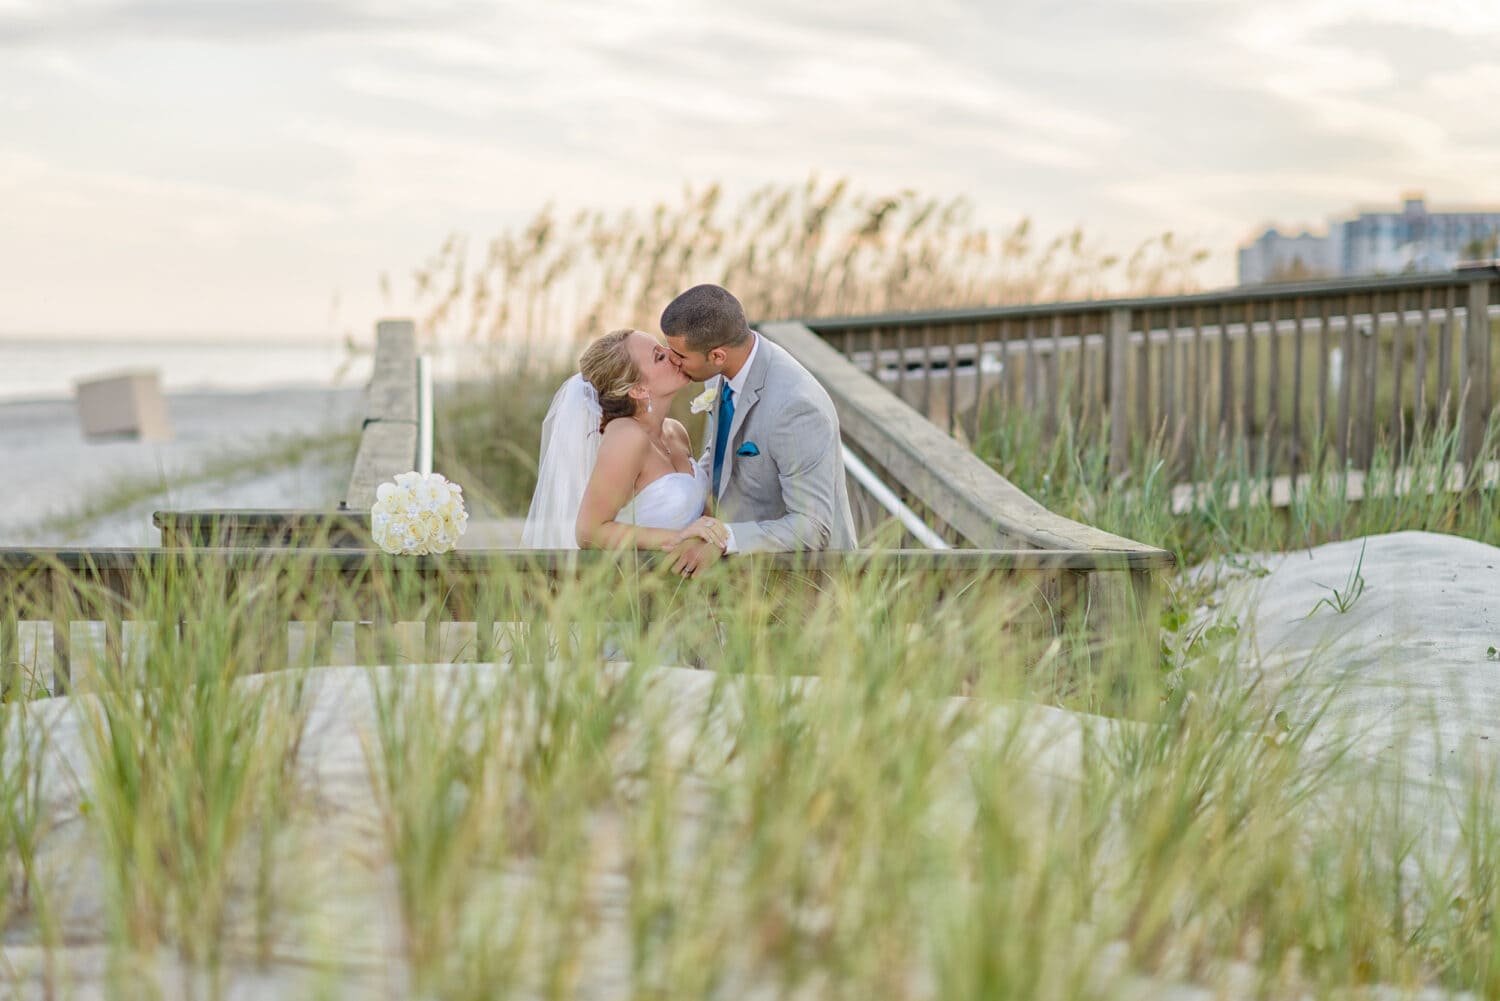 Kiss in front of the sea oats after wedding - Ocean Club, Grande Dunes, Myrtle Beach